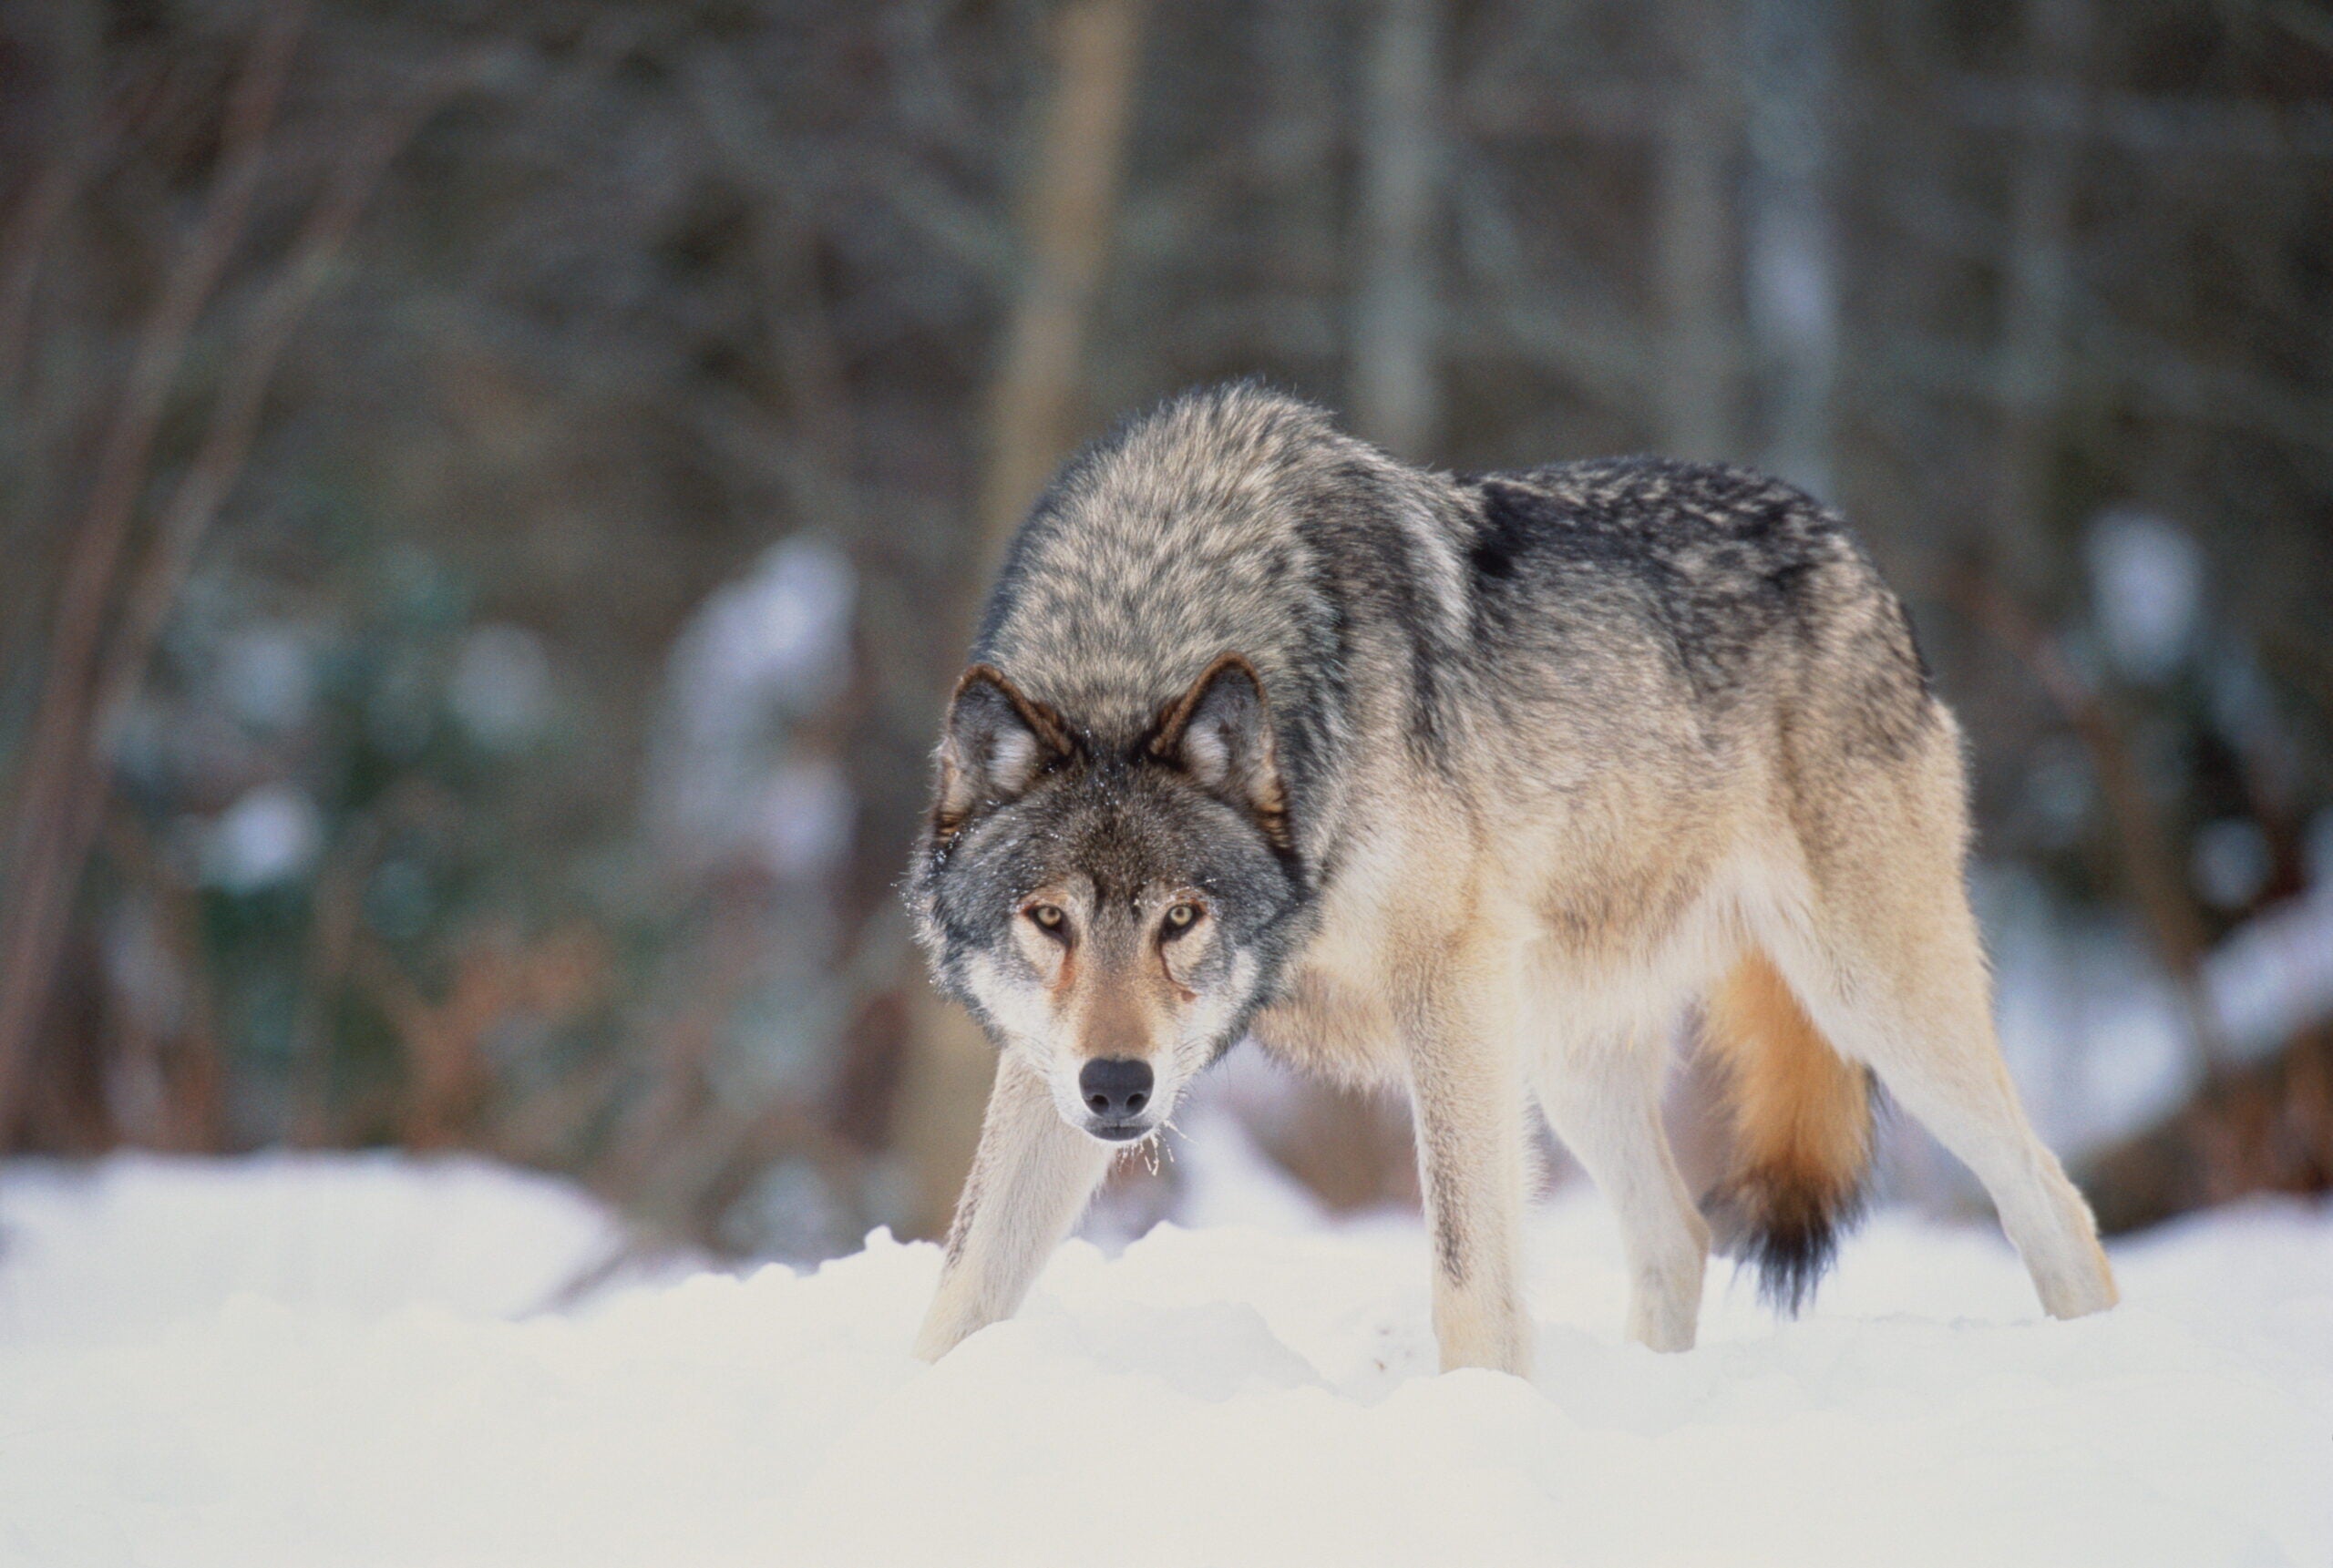 No charges filed against Michigan hunter who shot gray wolf